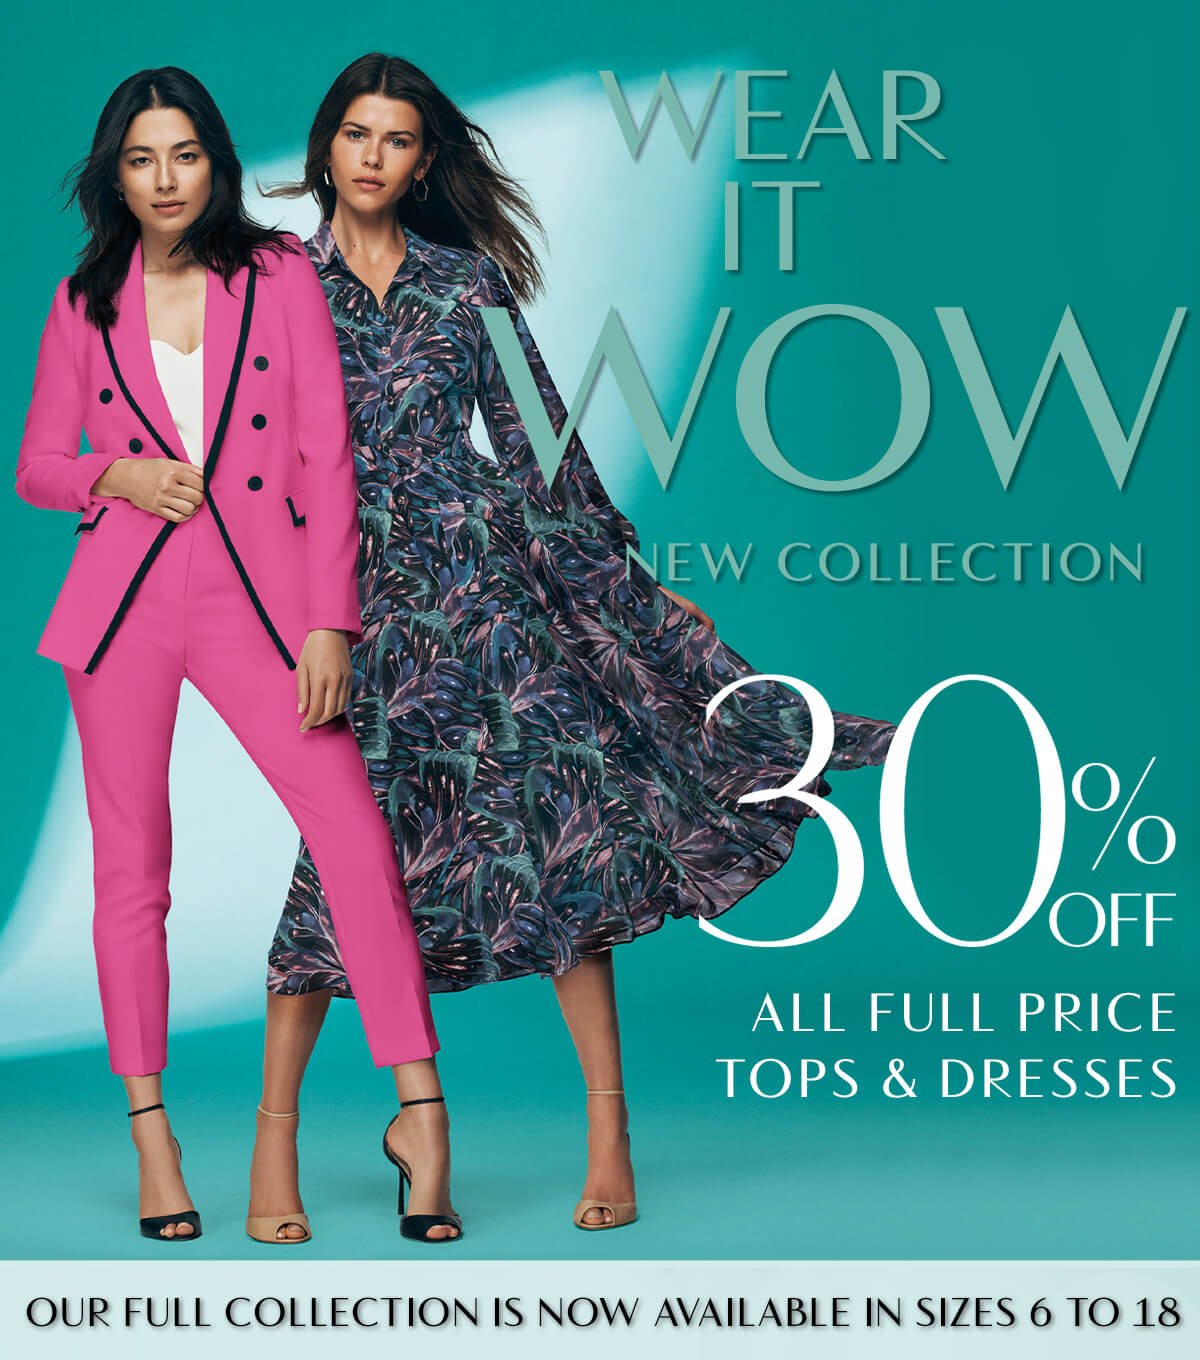 Wear It Wow New Collection. 30% Off All Full Price Tops & Dresses. Our full collection is now available in sizes 6 to 18